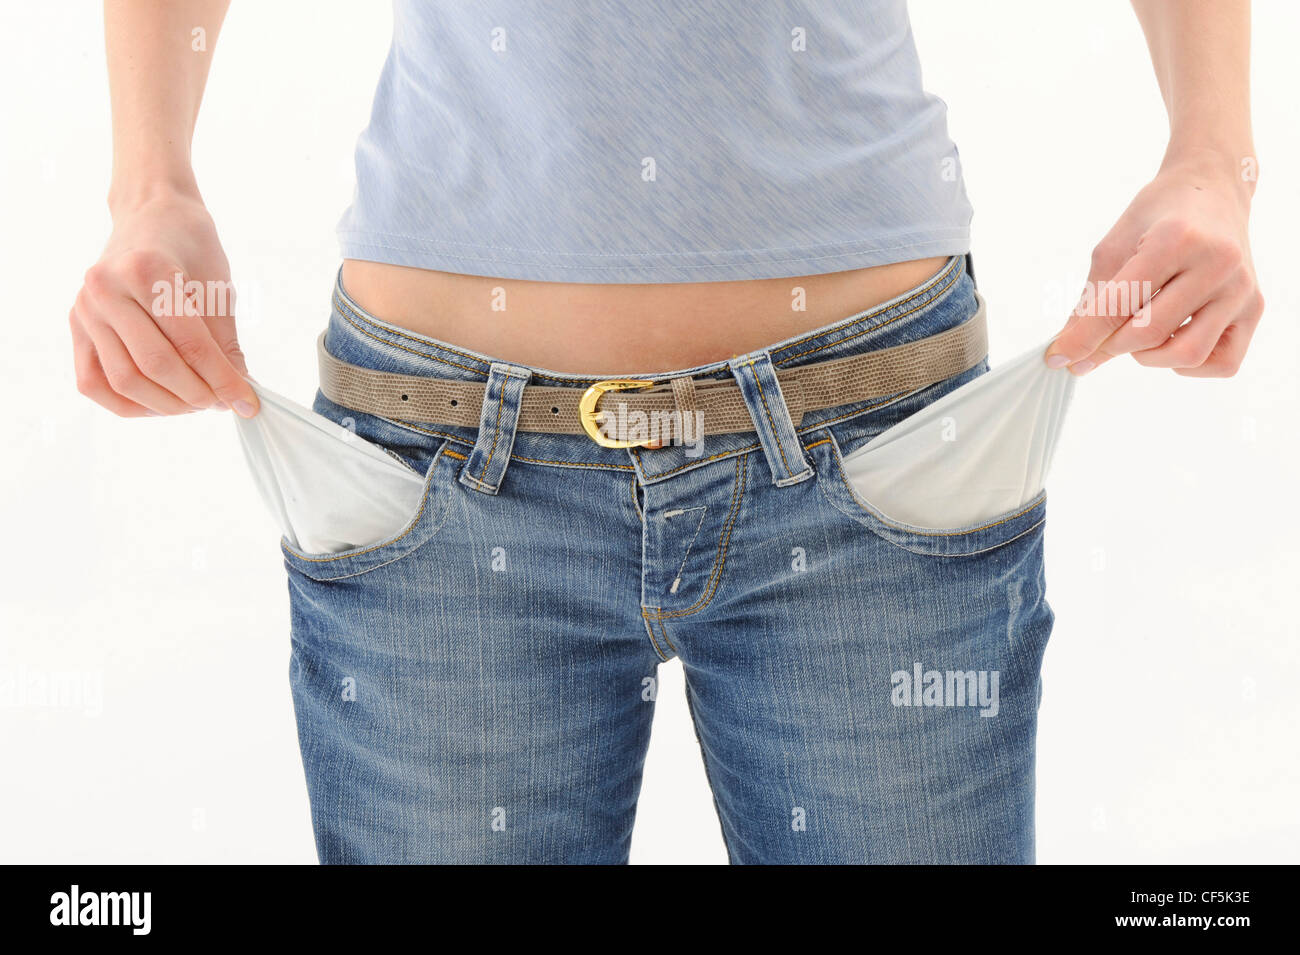 Female wearing a grey top and jeans with brown belt, pulling out empty pockets with both hands Stock Photo